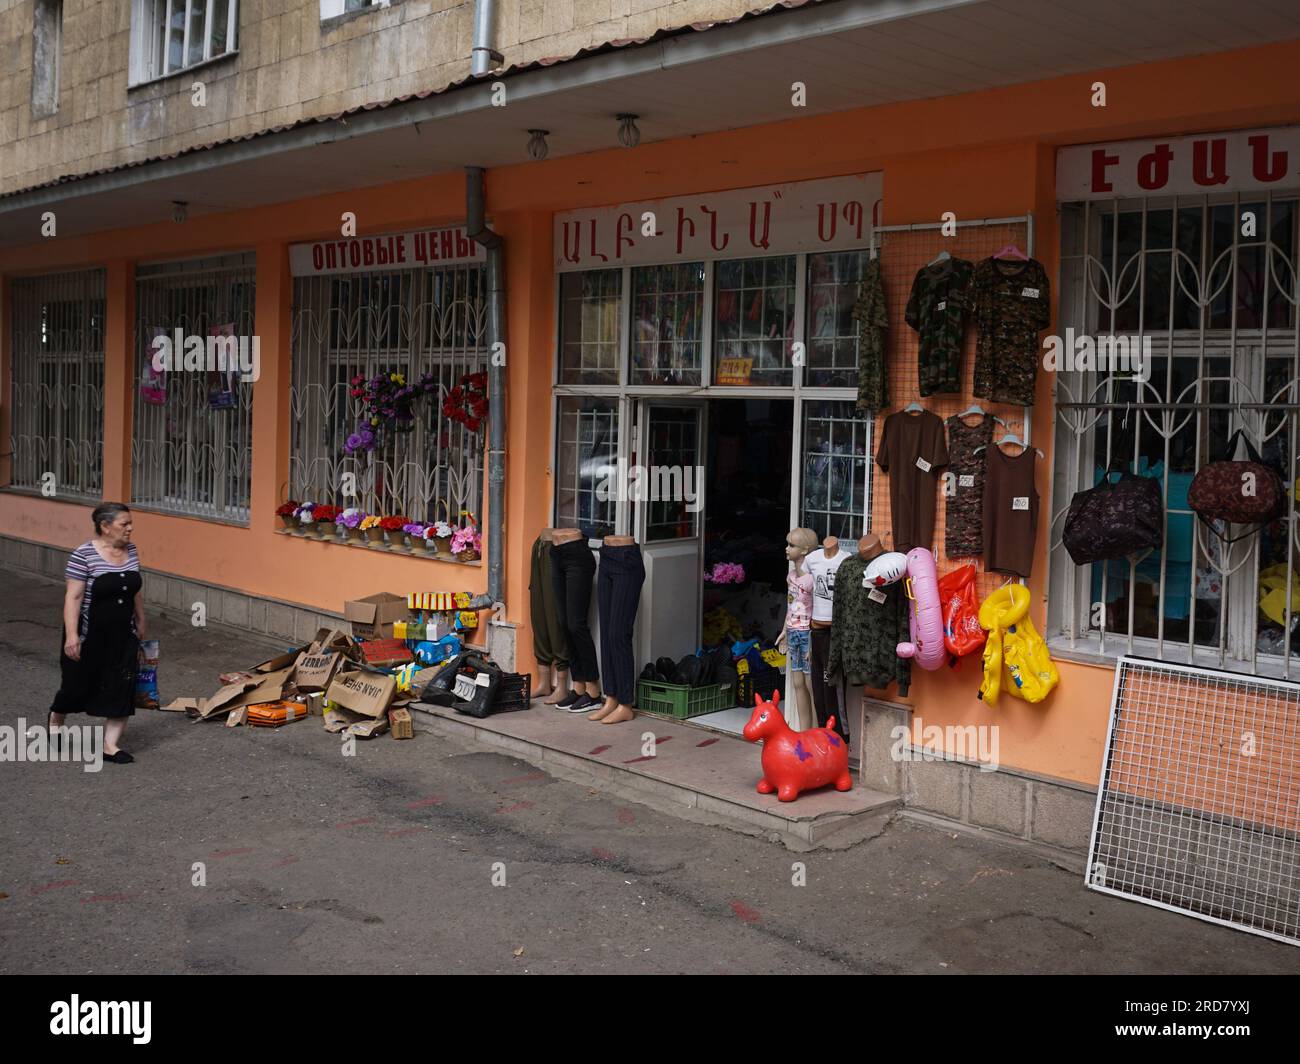 A woman seen walking past a store on the street of Stepanakert, Nagorno-Karabakh. The unrecognised yet de facto independent country in South Caucasus, Nagorno-Karabakh (also known as Artsakh) has been in the longest-running territorial dispute between Azerbaijan and Armenia in post-Soviet Eurasia since the collapse of Soviet Union. It is mainly populated by ethnic Armenians. Stock Photo